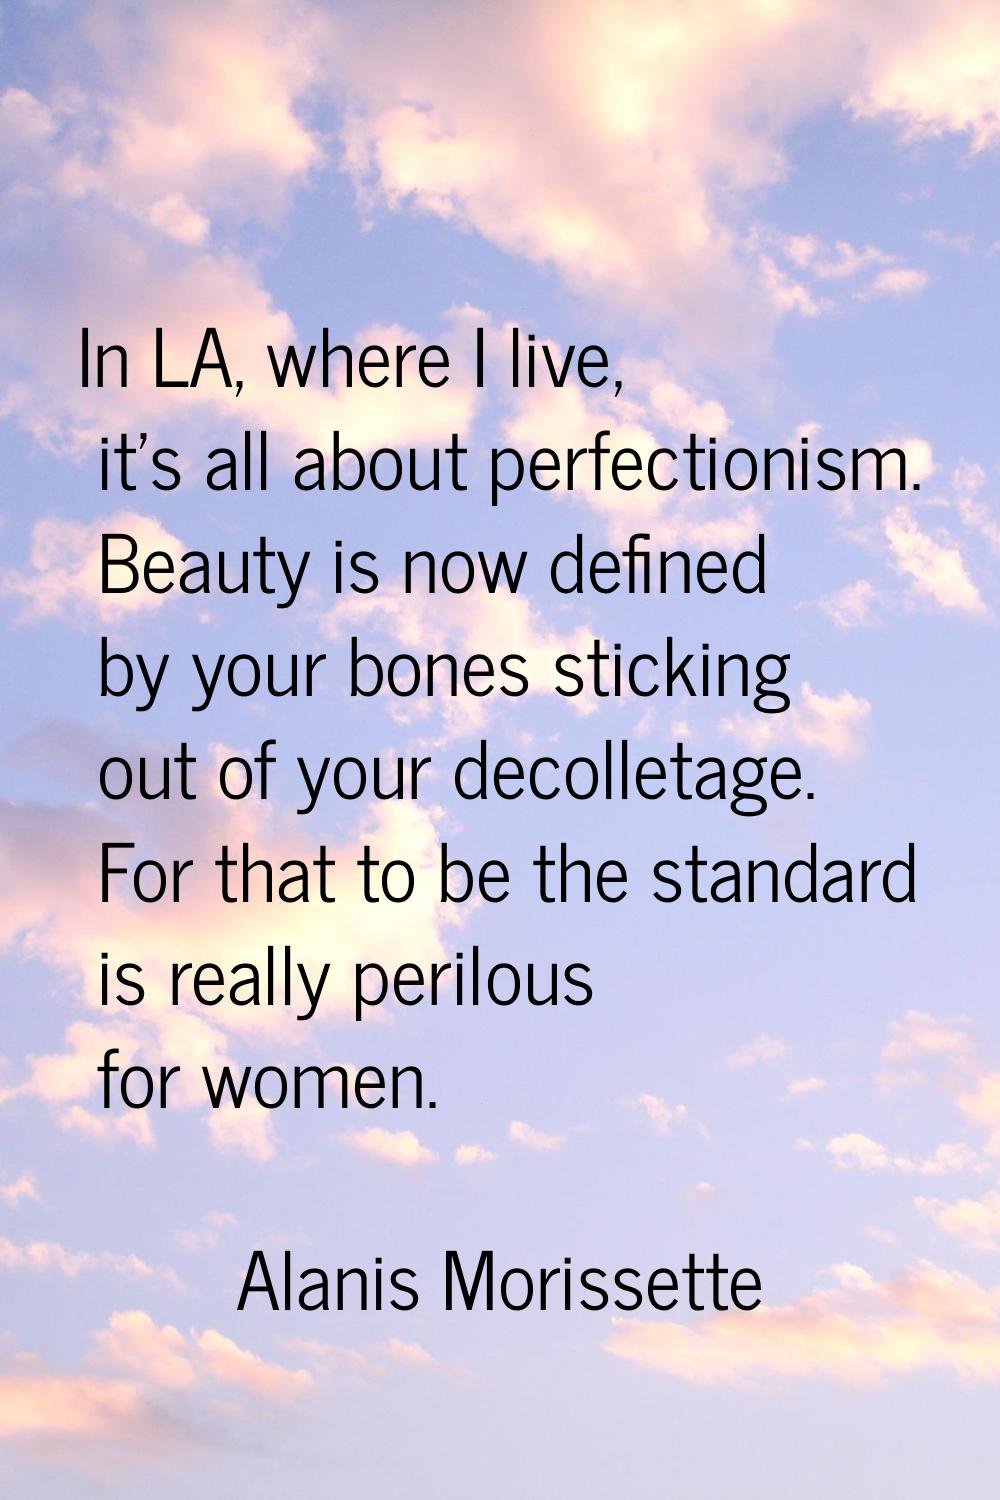 In LA, where I live, it's all about perfectionism. Beauty is now defined by your bones sticking out